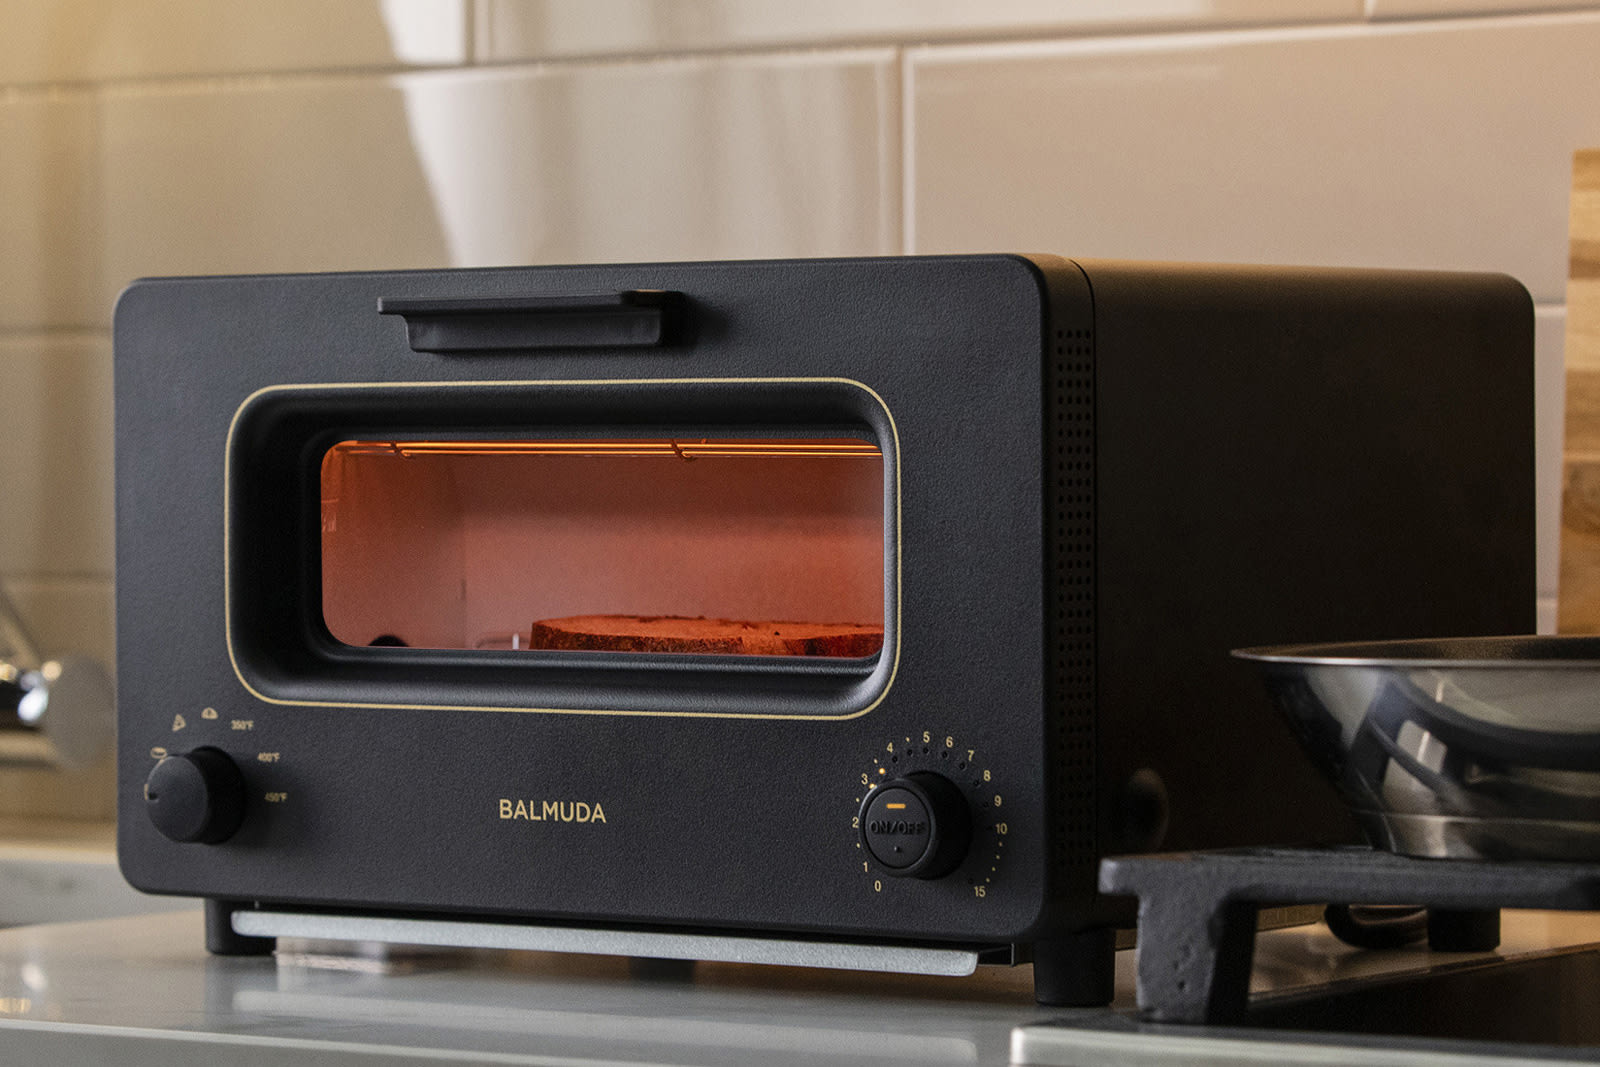 Balmuda's $329 steam-based toaster finally arrives in the US ...